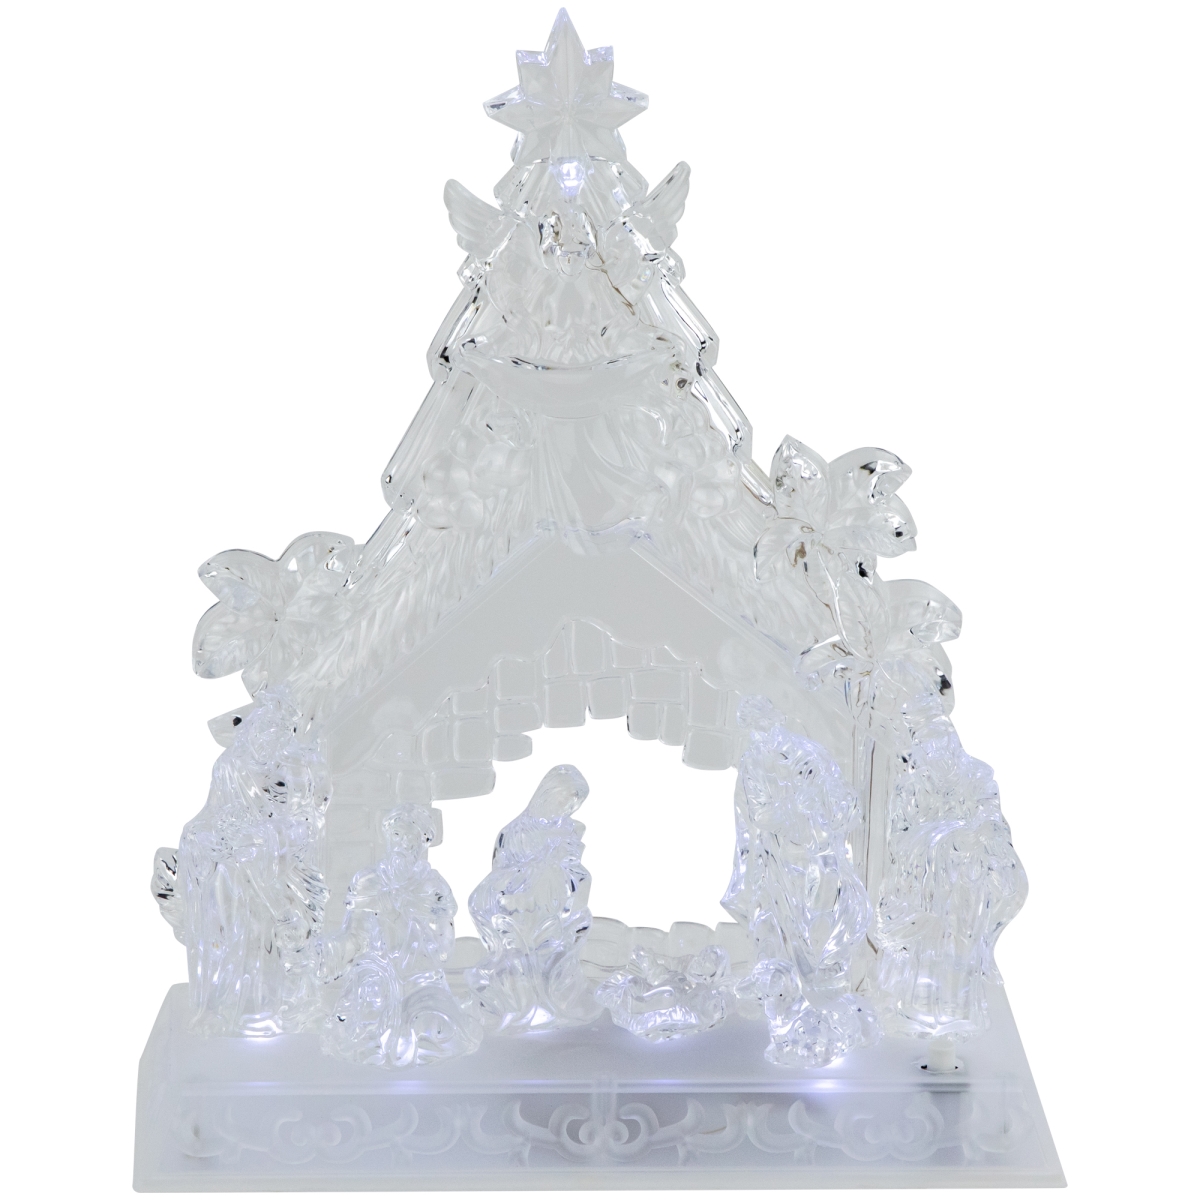 Picture of Northlight 35690054 12 in. LED Lighted Nativity Scene in Stable Acrylic Christmas Decoration